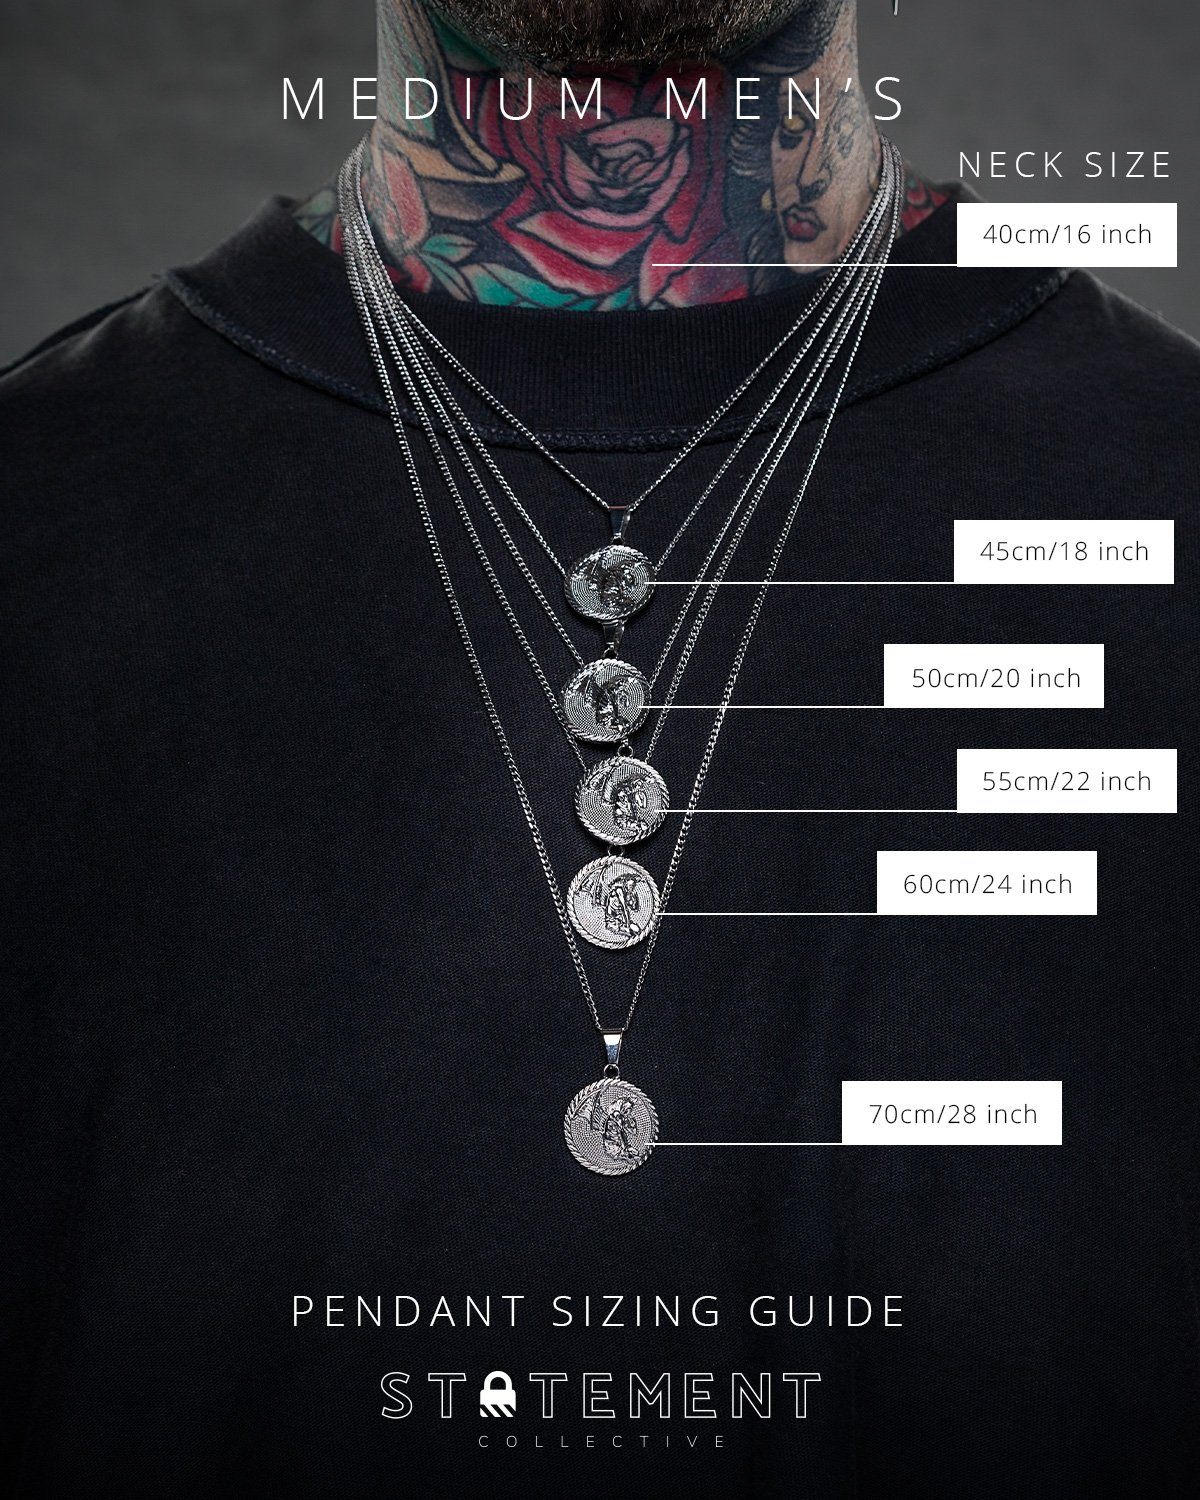 Average mens neck size guide by statement 